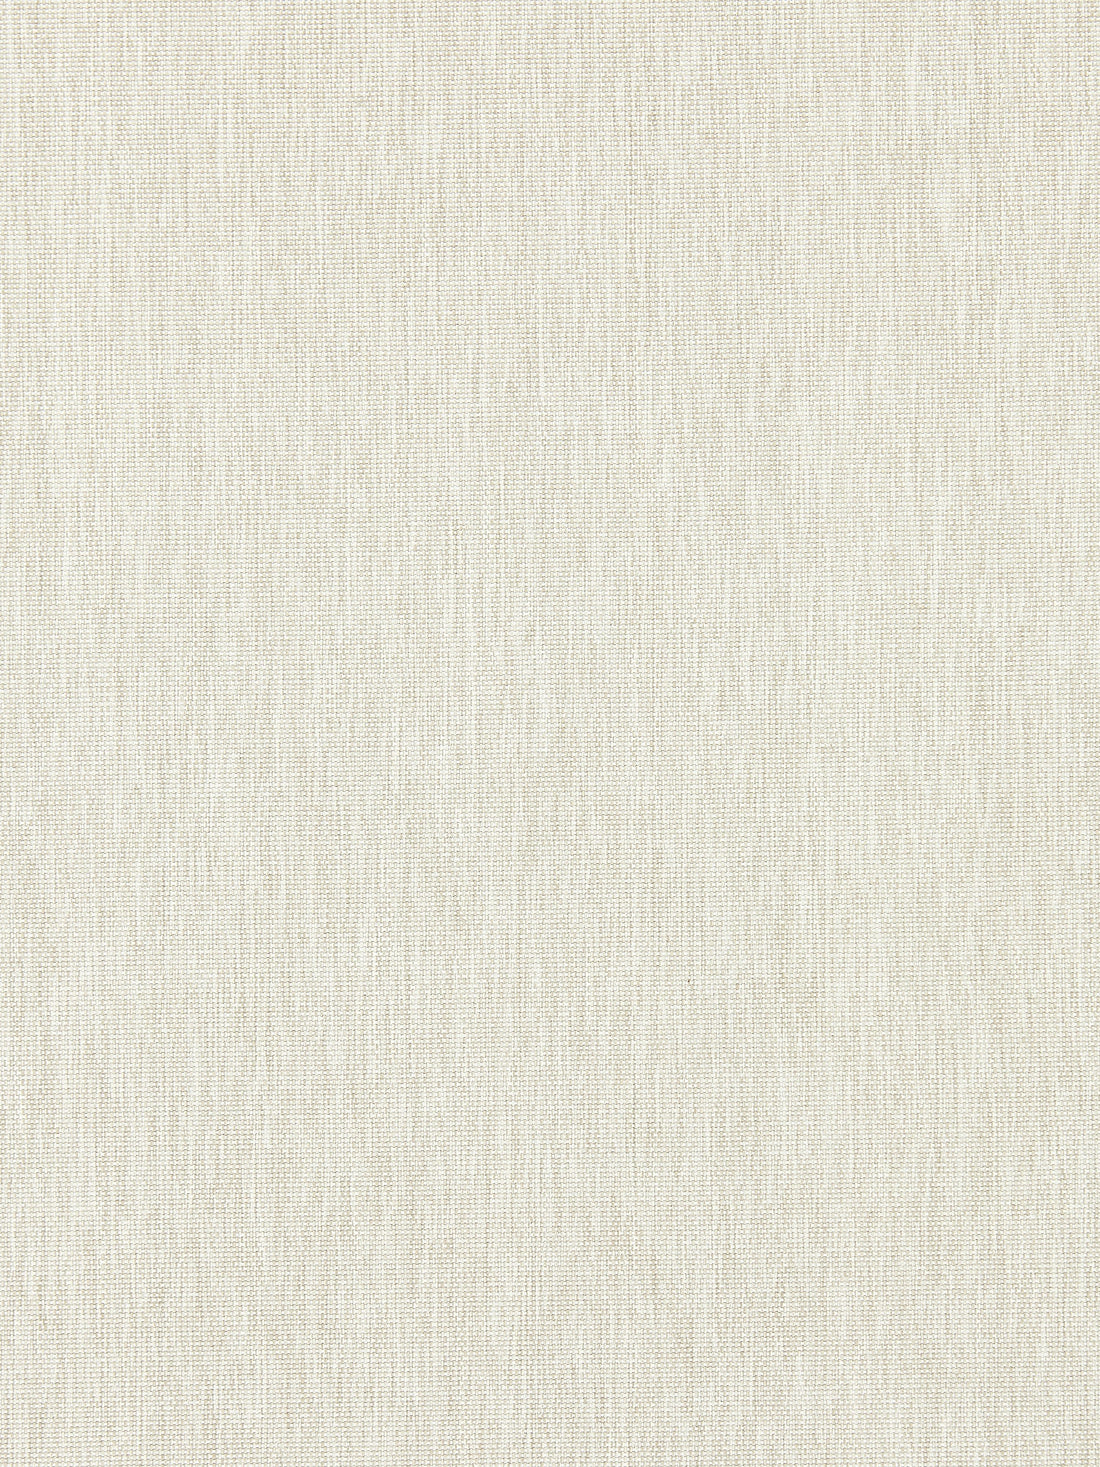 Canvas fabric in linen color - pattern number SC 000127067 - by Scalamandre in the Scalamandre Fabrics Book 1 collection